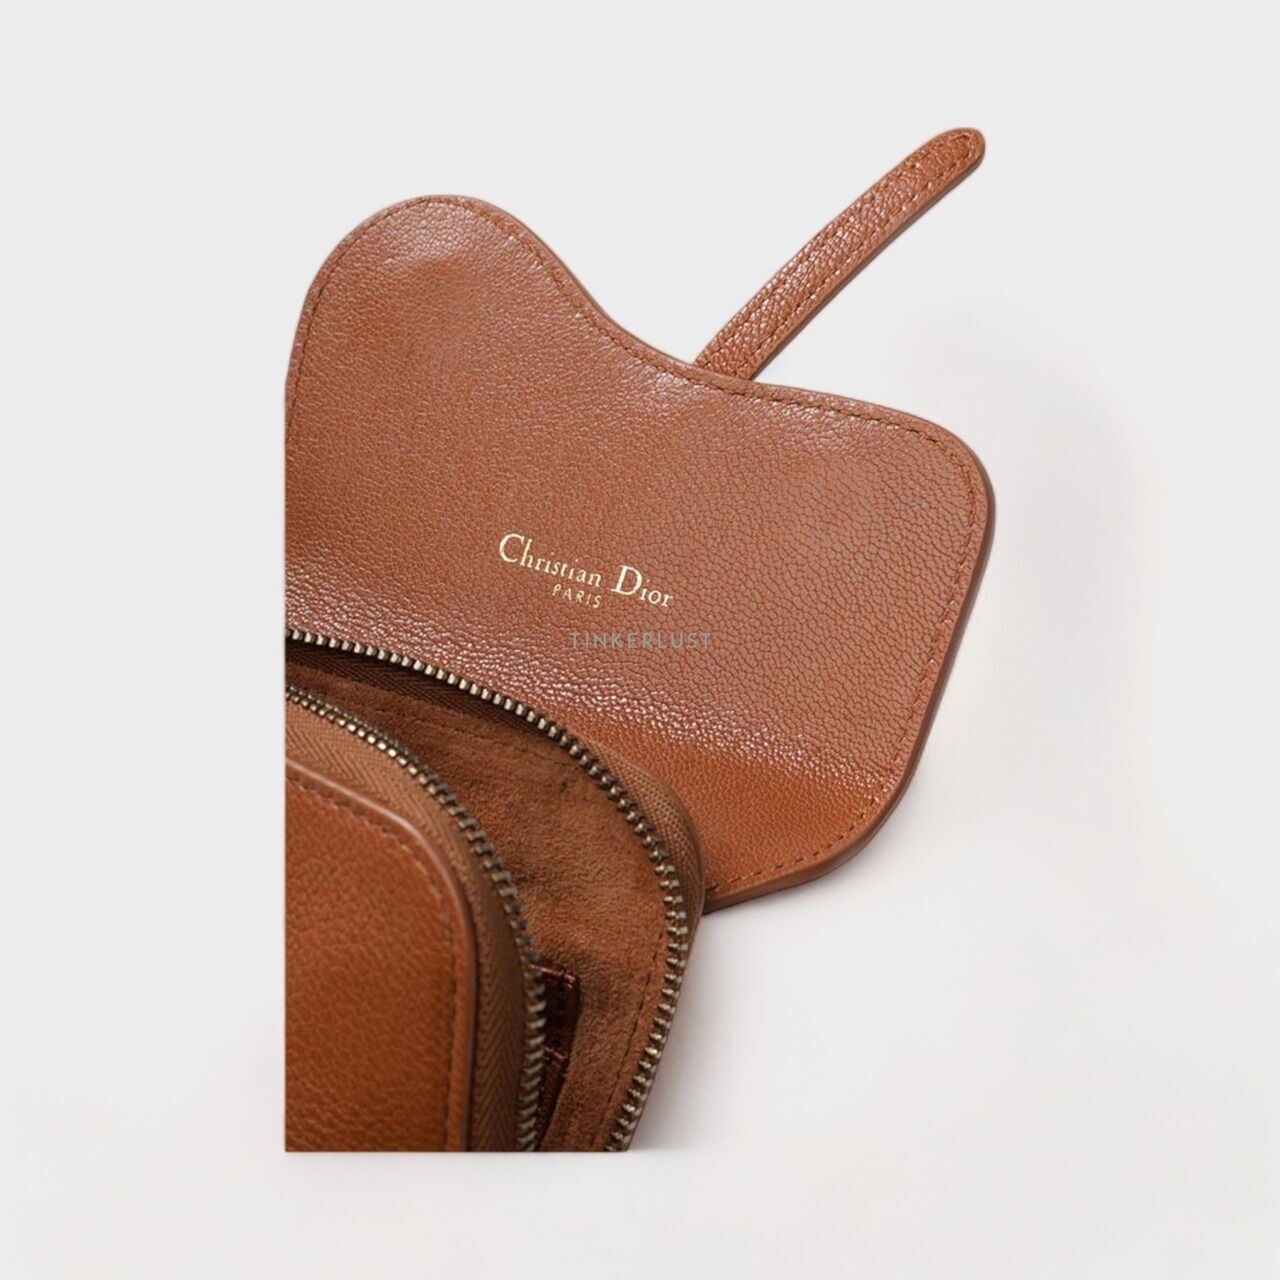 Christian Dior Saddle Multifuctional Pouch in Cognac Grained Leather Luggage